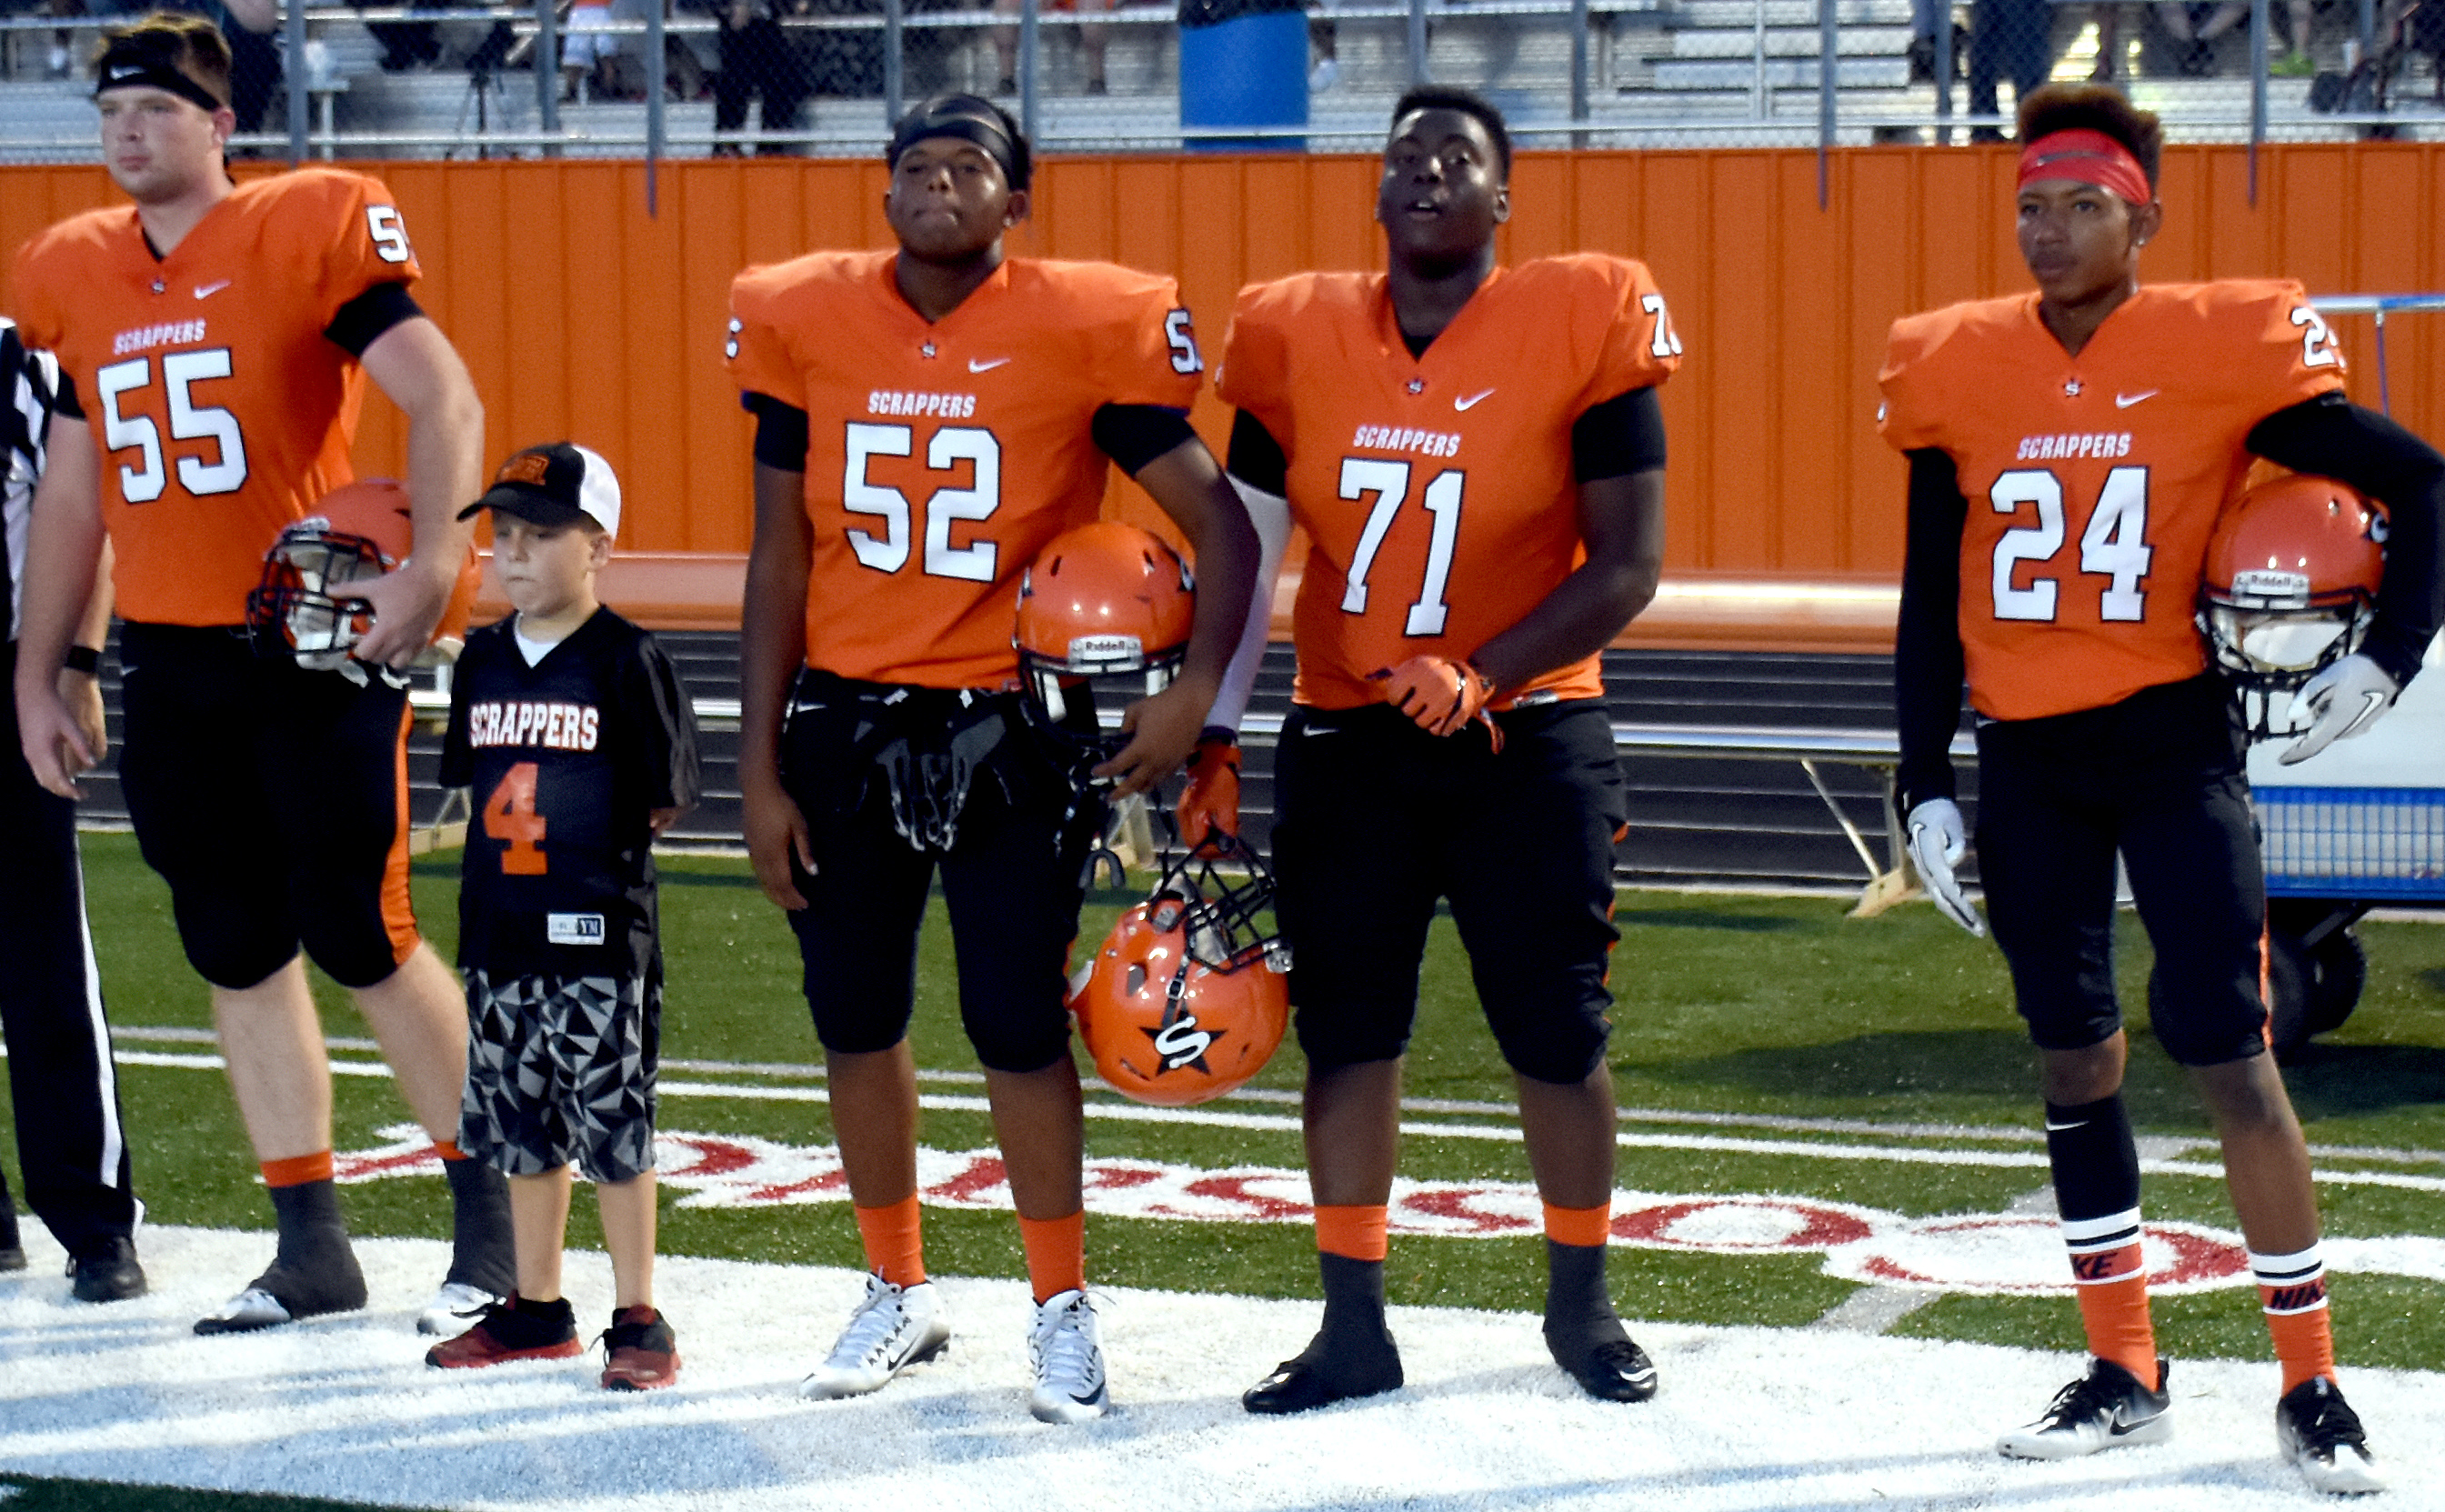 Team captains Austin Bowman, Halton Howard, Antonio Haney, Marquell McFalls, and Dennis Scott move toward midfield for the coin toss. Howard was Team Captain for a Day from last spring's Scrapper Showdown.